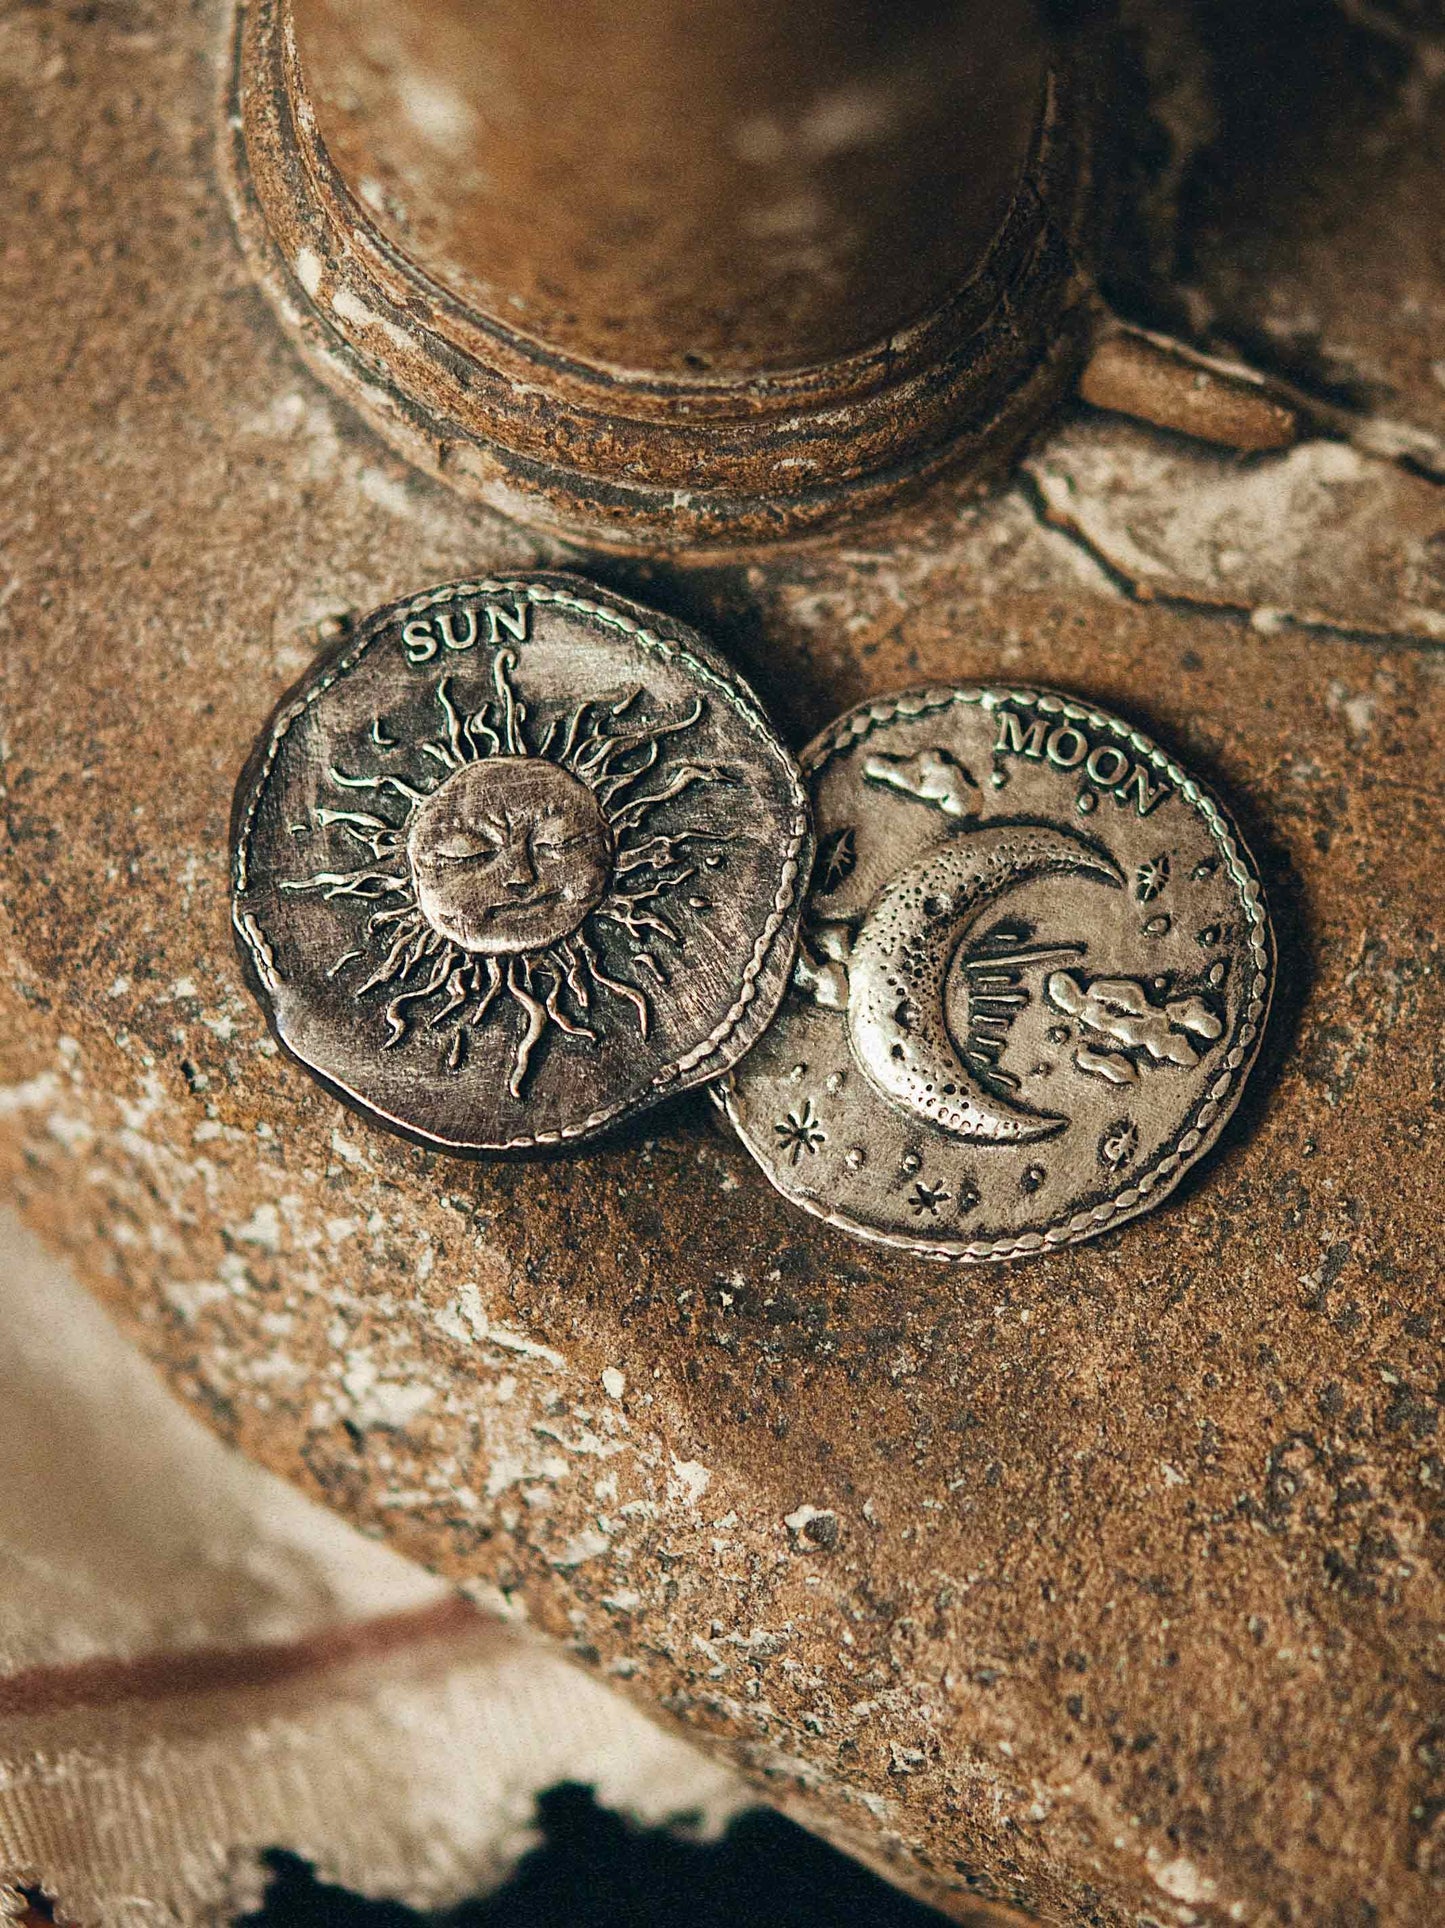 Celestial Decision-Making Coin